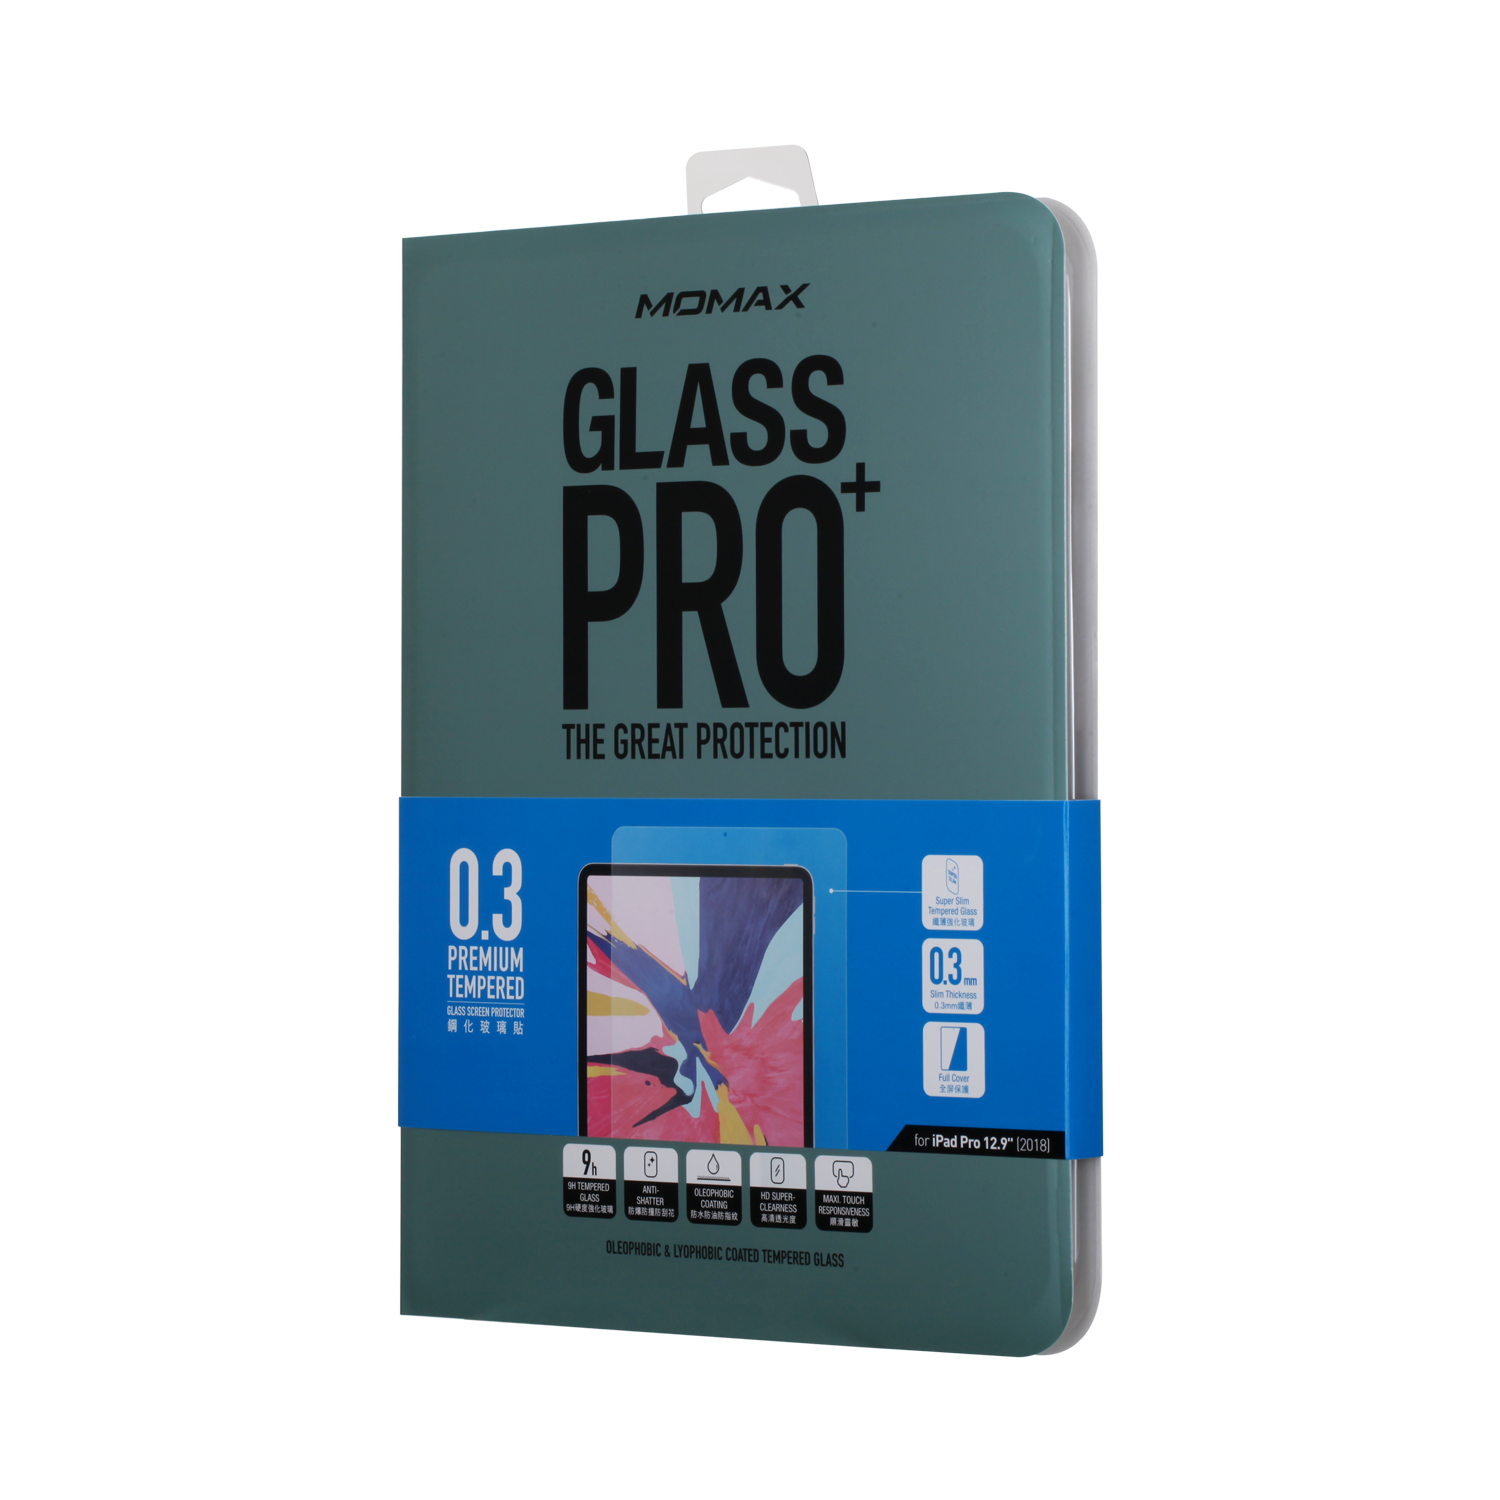 Glass Pro+ | 0.3mm Tempered Glass Screen Protector for iPad Pro 12.9-inch (2018/2020)